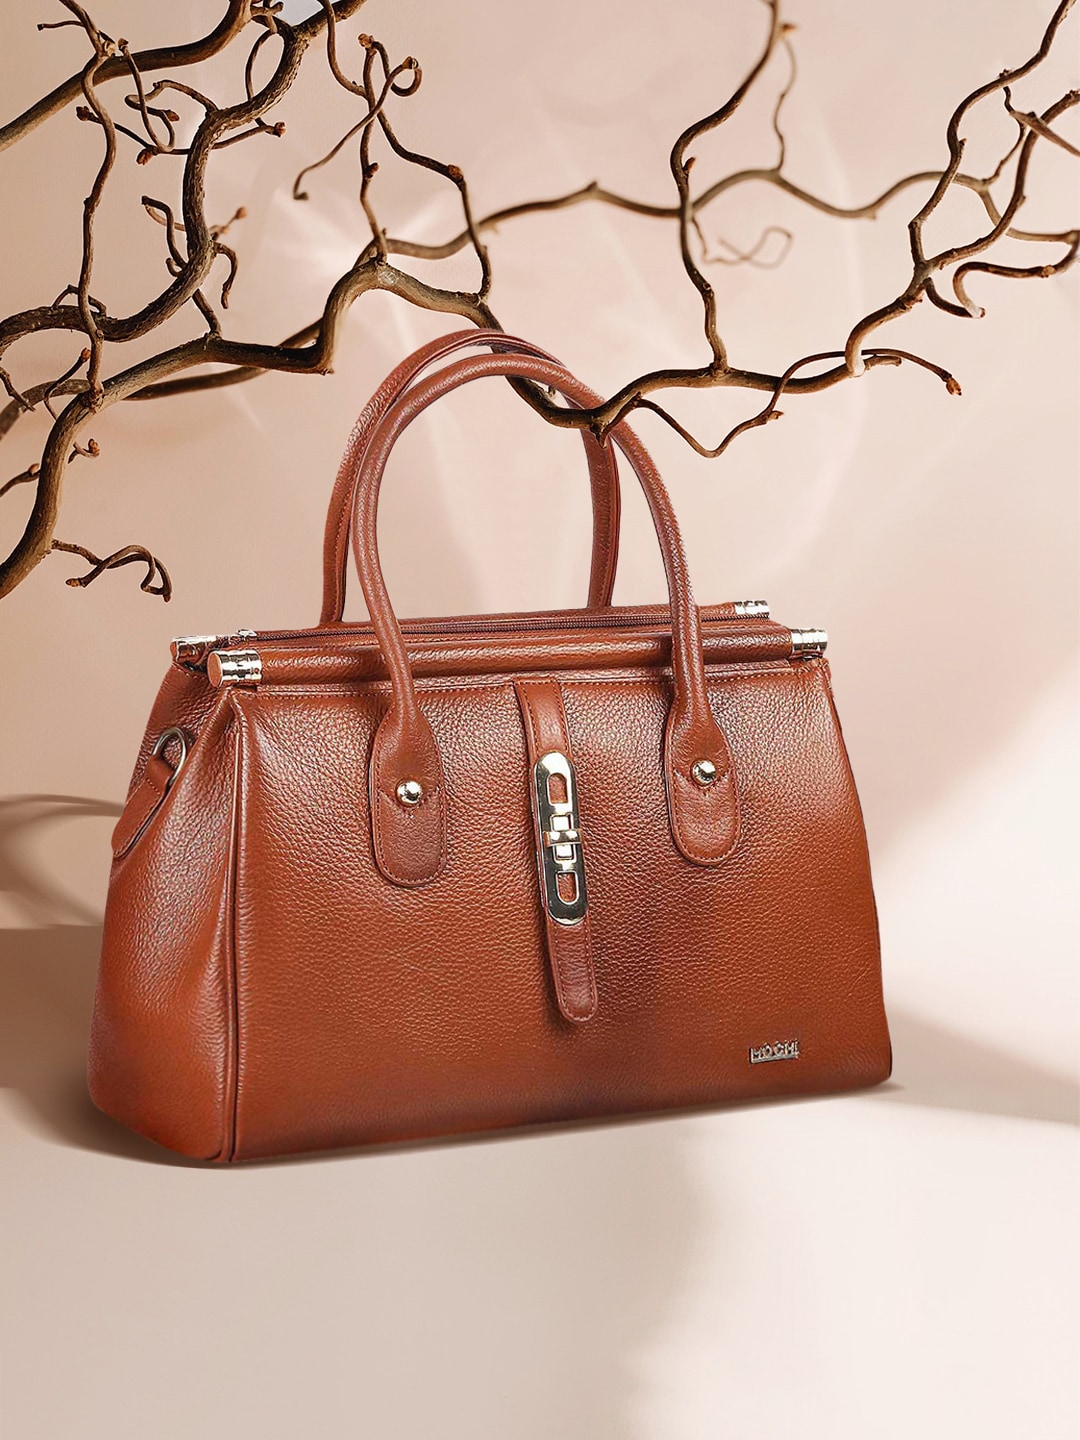 Mochi Tan Textured Leather Structured Handheld Bag Price in India